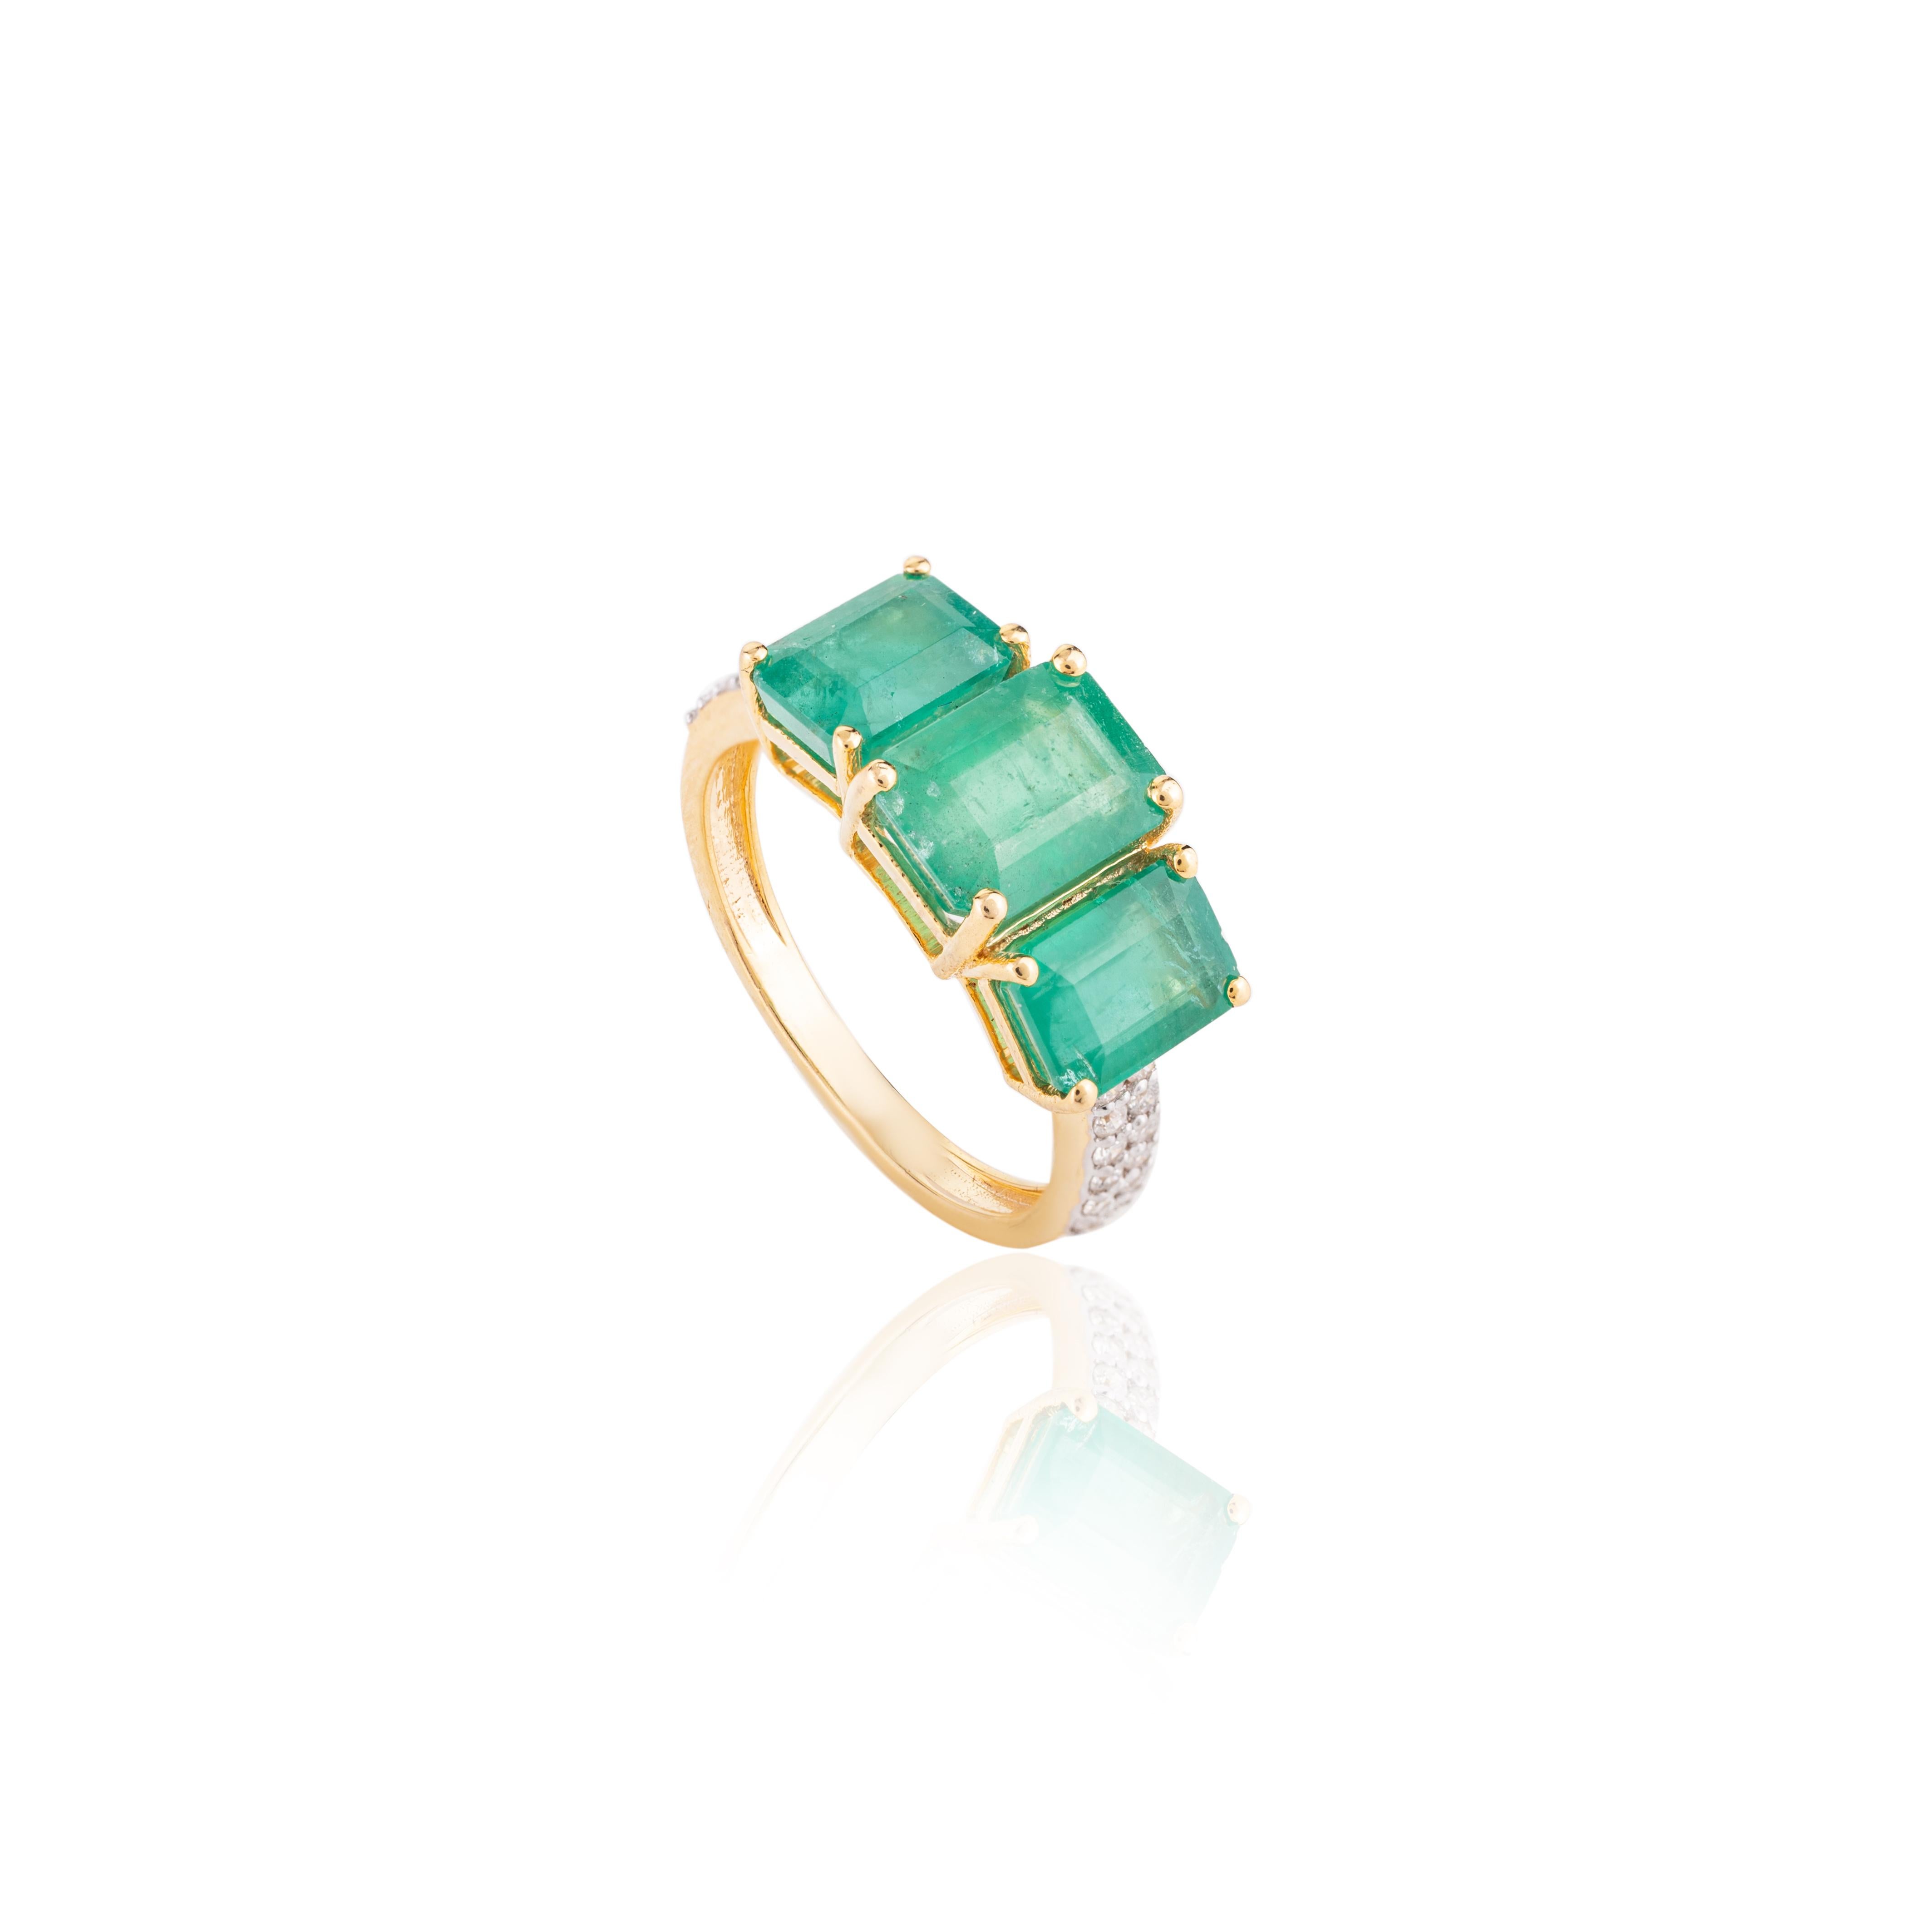 For Sale:  Genuine 4.14 CTW Three Stone Emerald Ring in 18k Solid Yellow Gold  7